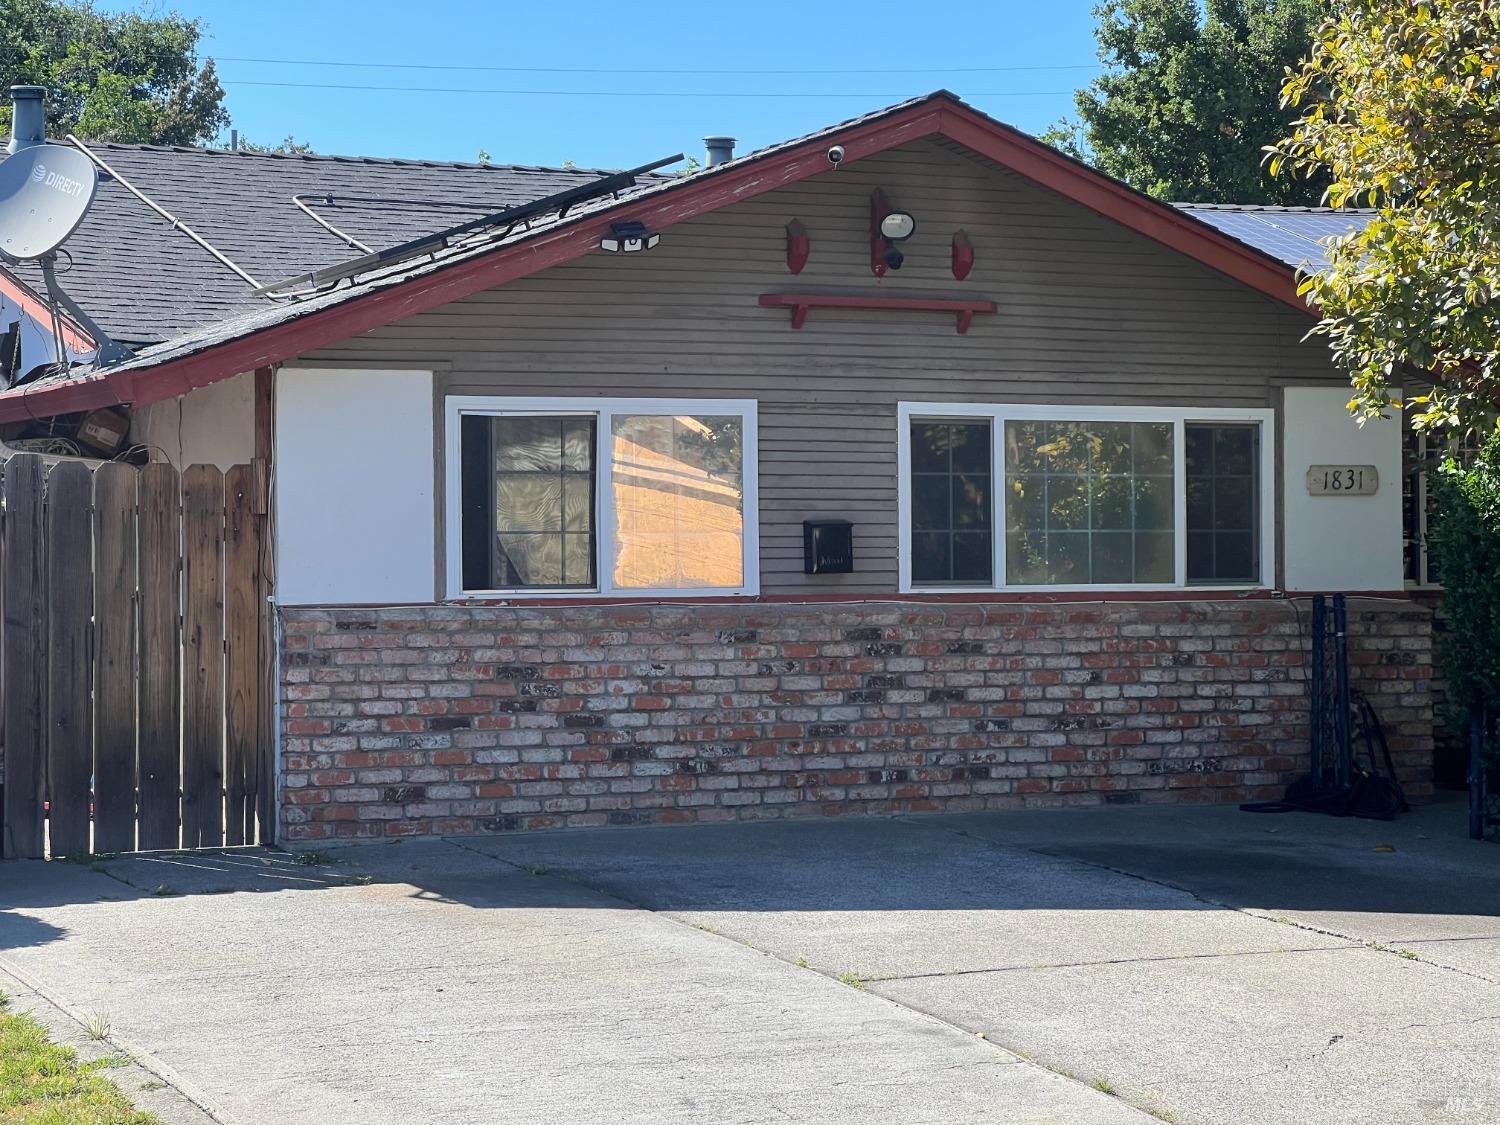 4 bedroom 2 baths one story house near transportation and shopping. Solar is owned. Central air and 